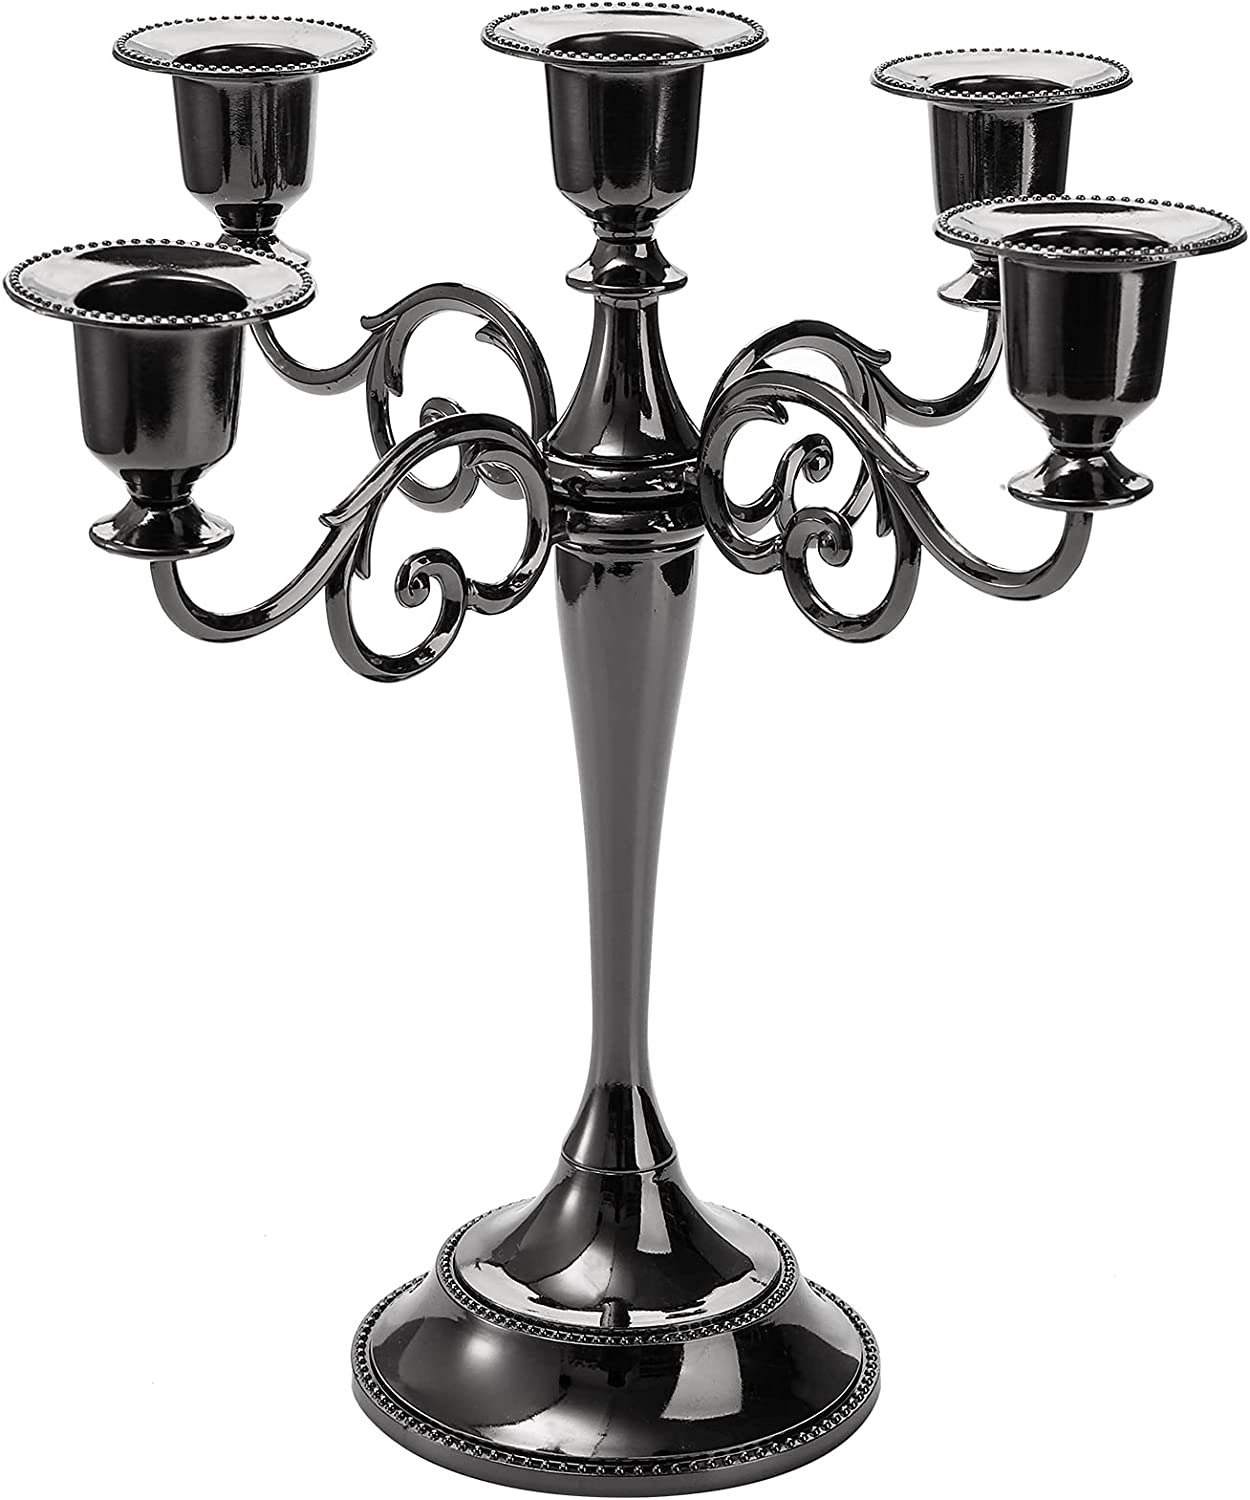 YOUEON 5 Arms Candelabra, 10.4 Inch Tall Glossy Black Candlestick Holder, Gothic